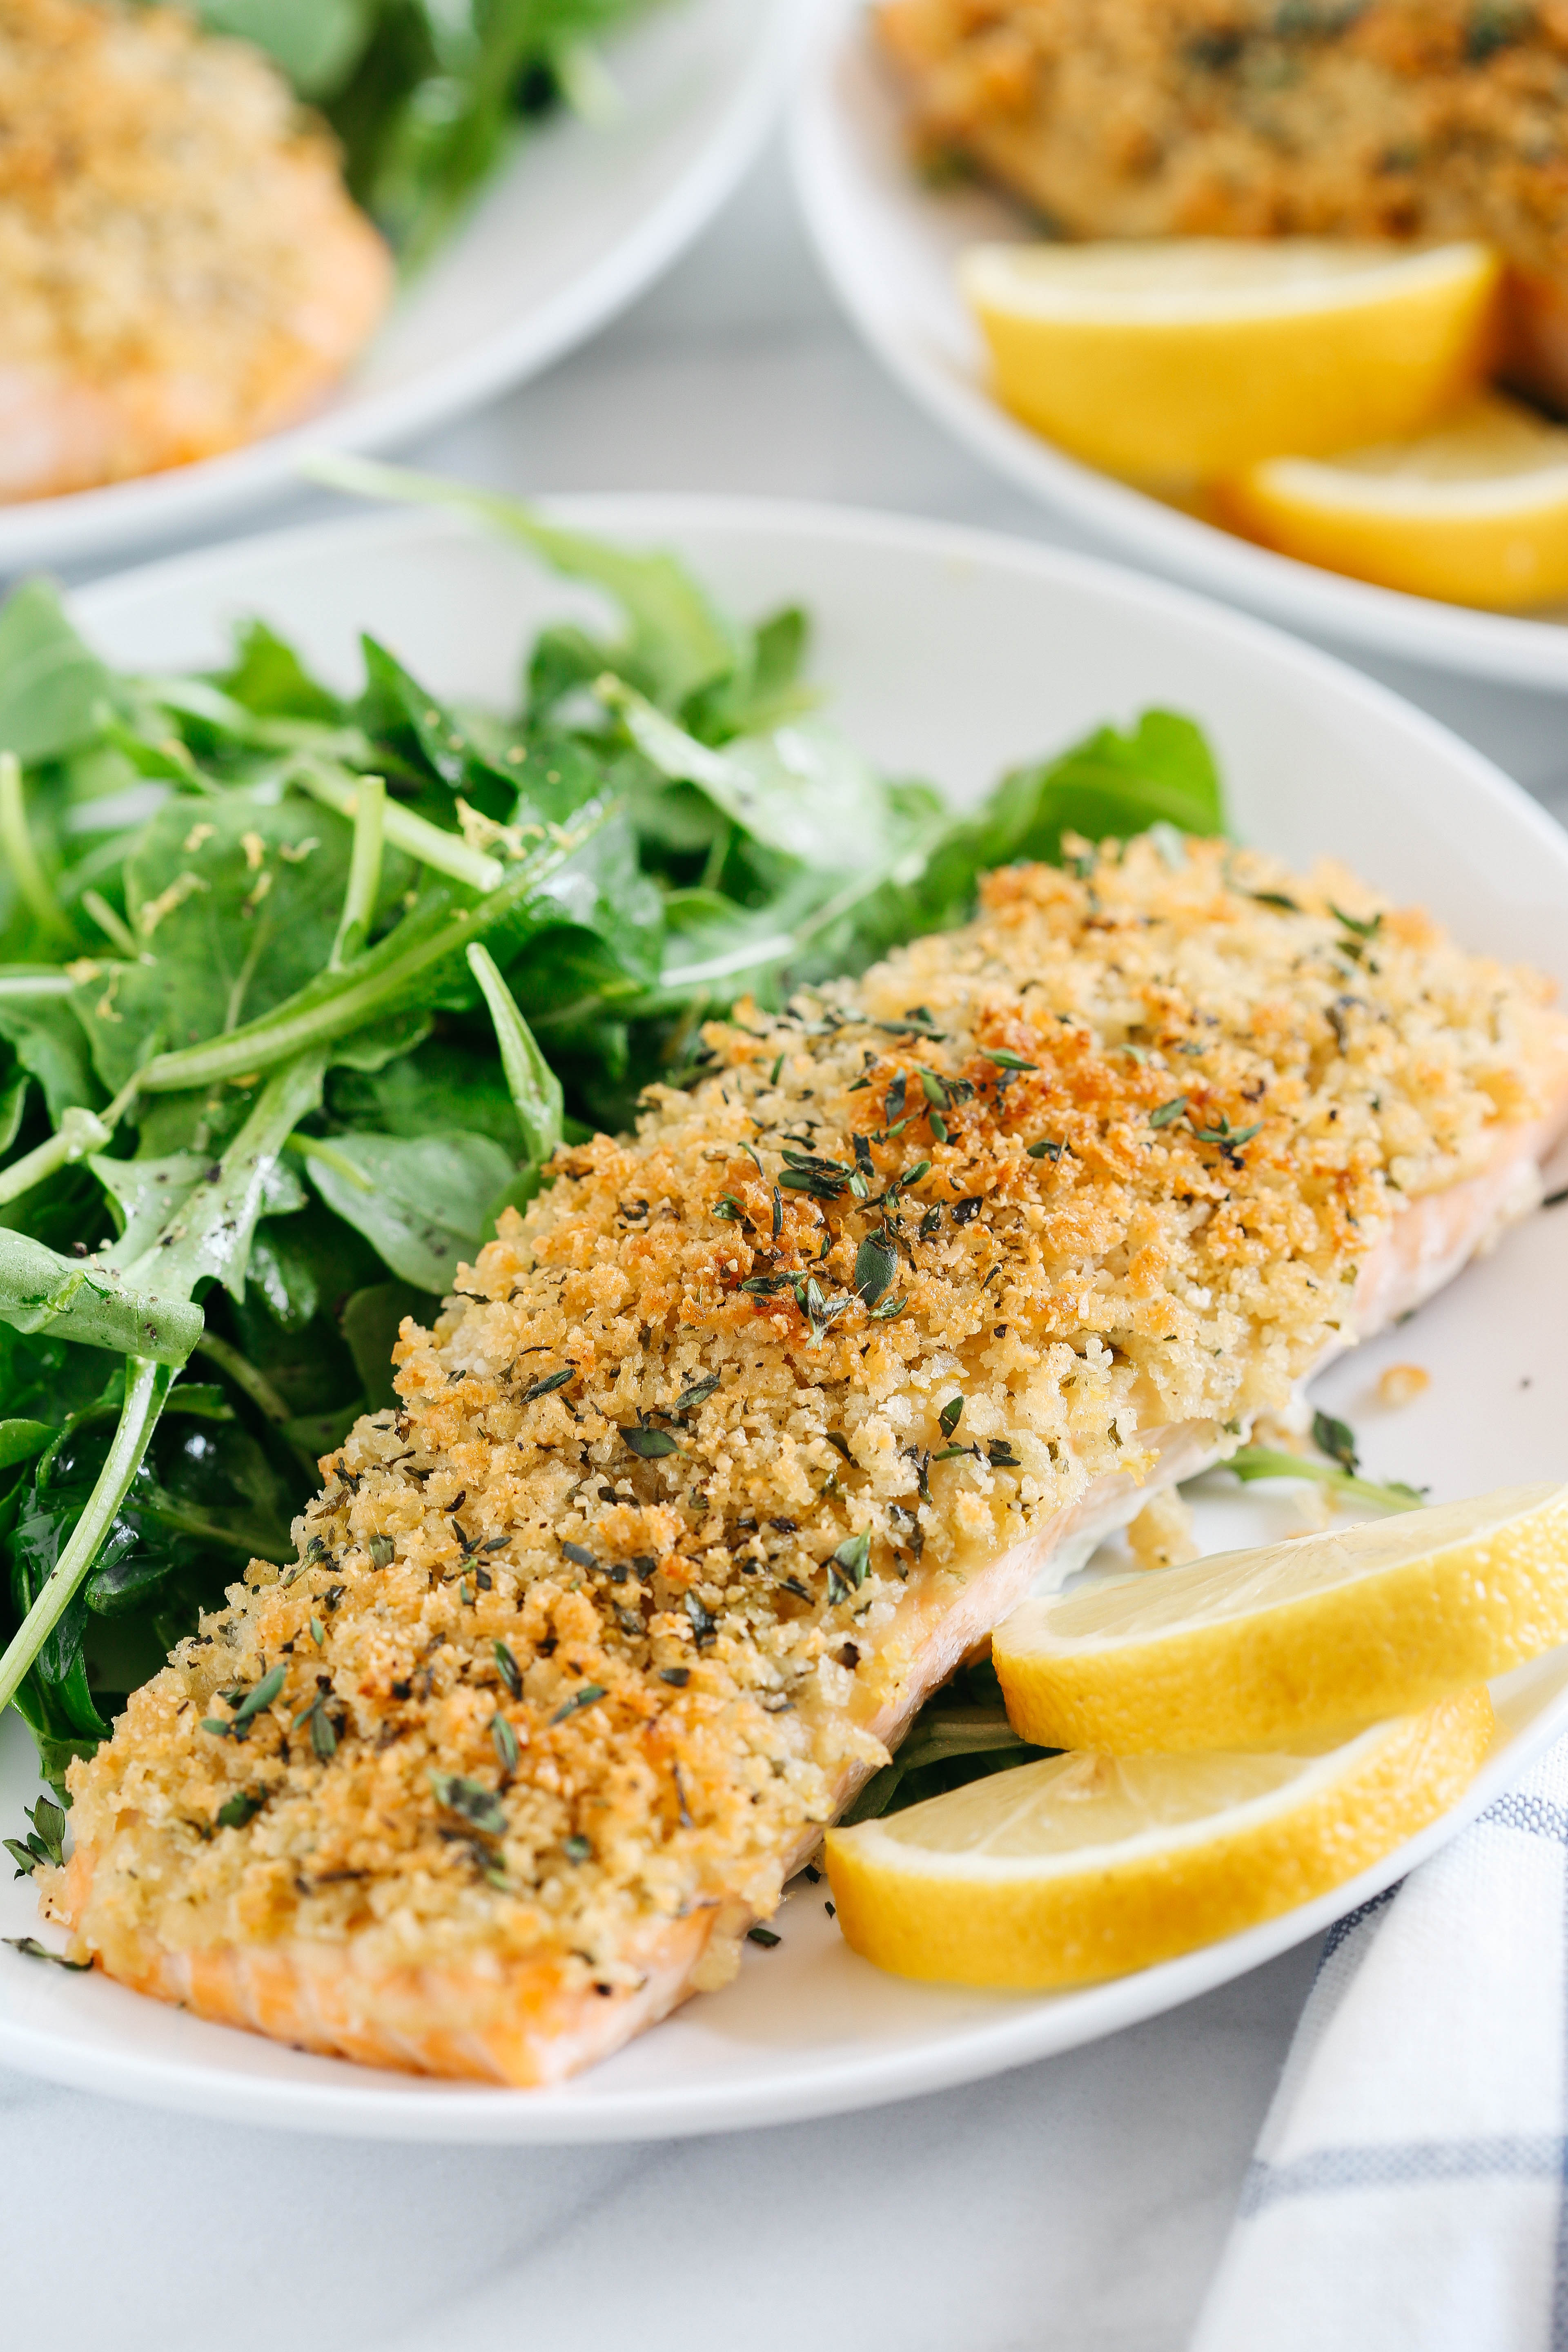 Hummus Crusted Salmon baked to perfection and served with a delicious Lemon Arugula Salad for the perfect healthy weeknight meal ready in under 30 minutes!